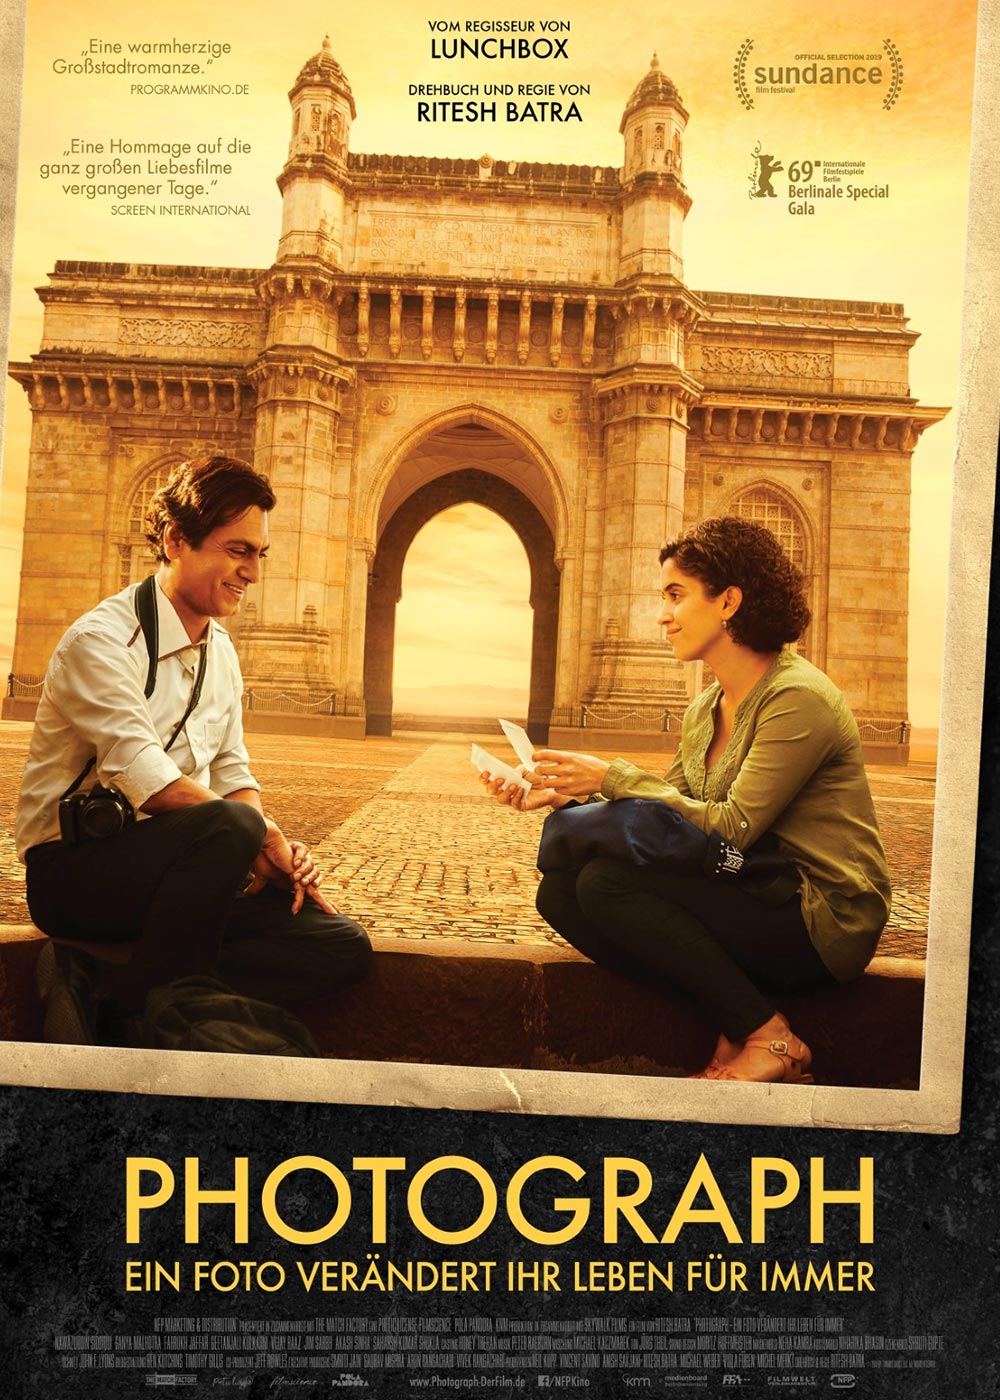 Photograph Movie Release Date, Cast, Trailer, Songs, Review